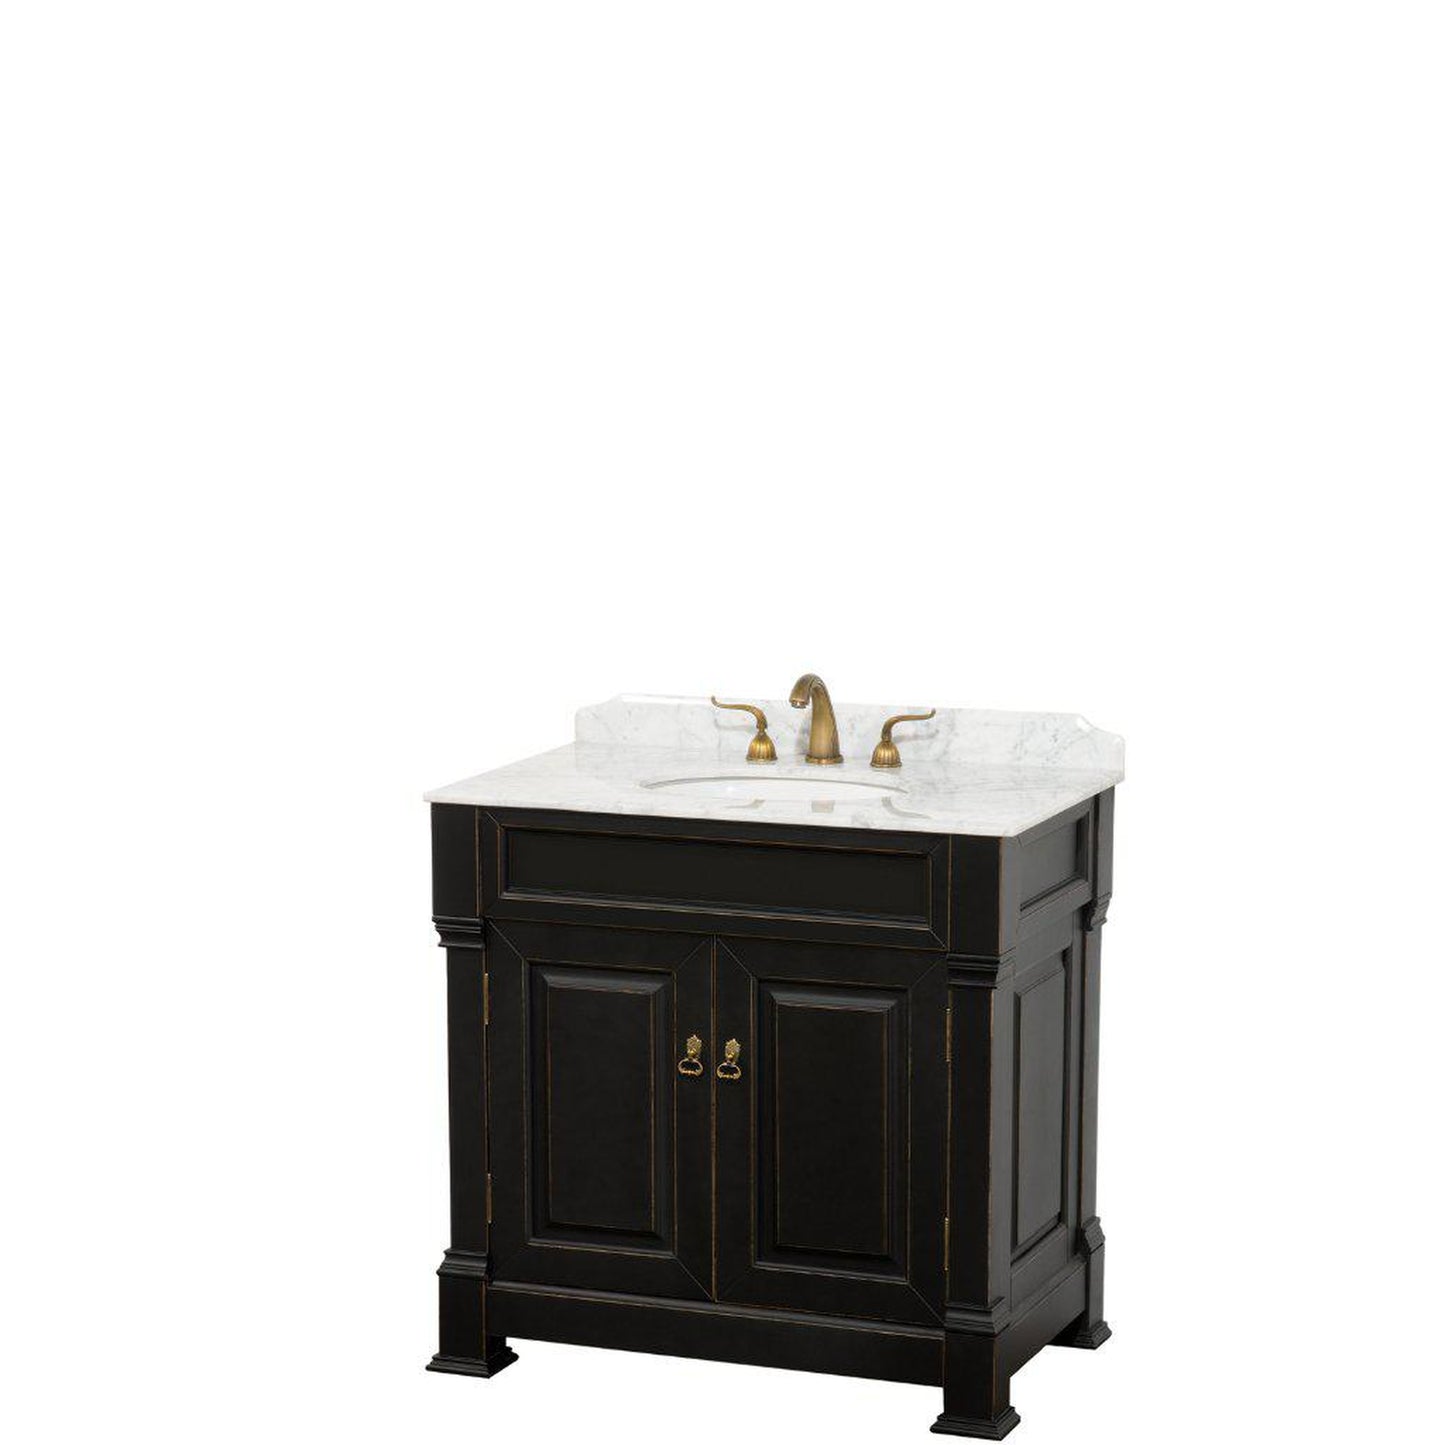 Wyndham Collection Andover 36" Single Bathroom Black Vanity With White Carrara Marble Countertop And Undermount Oval Sink, And No Mirror